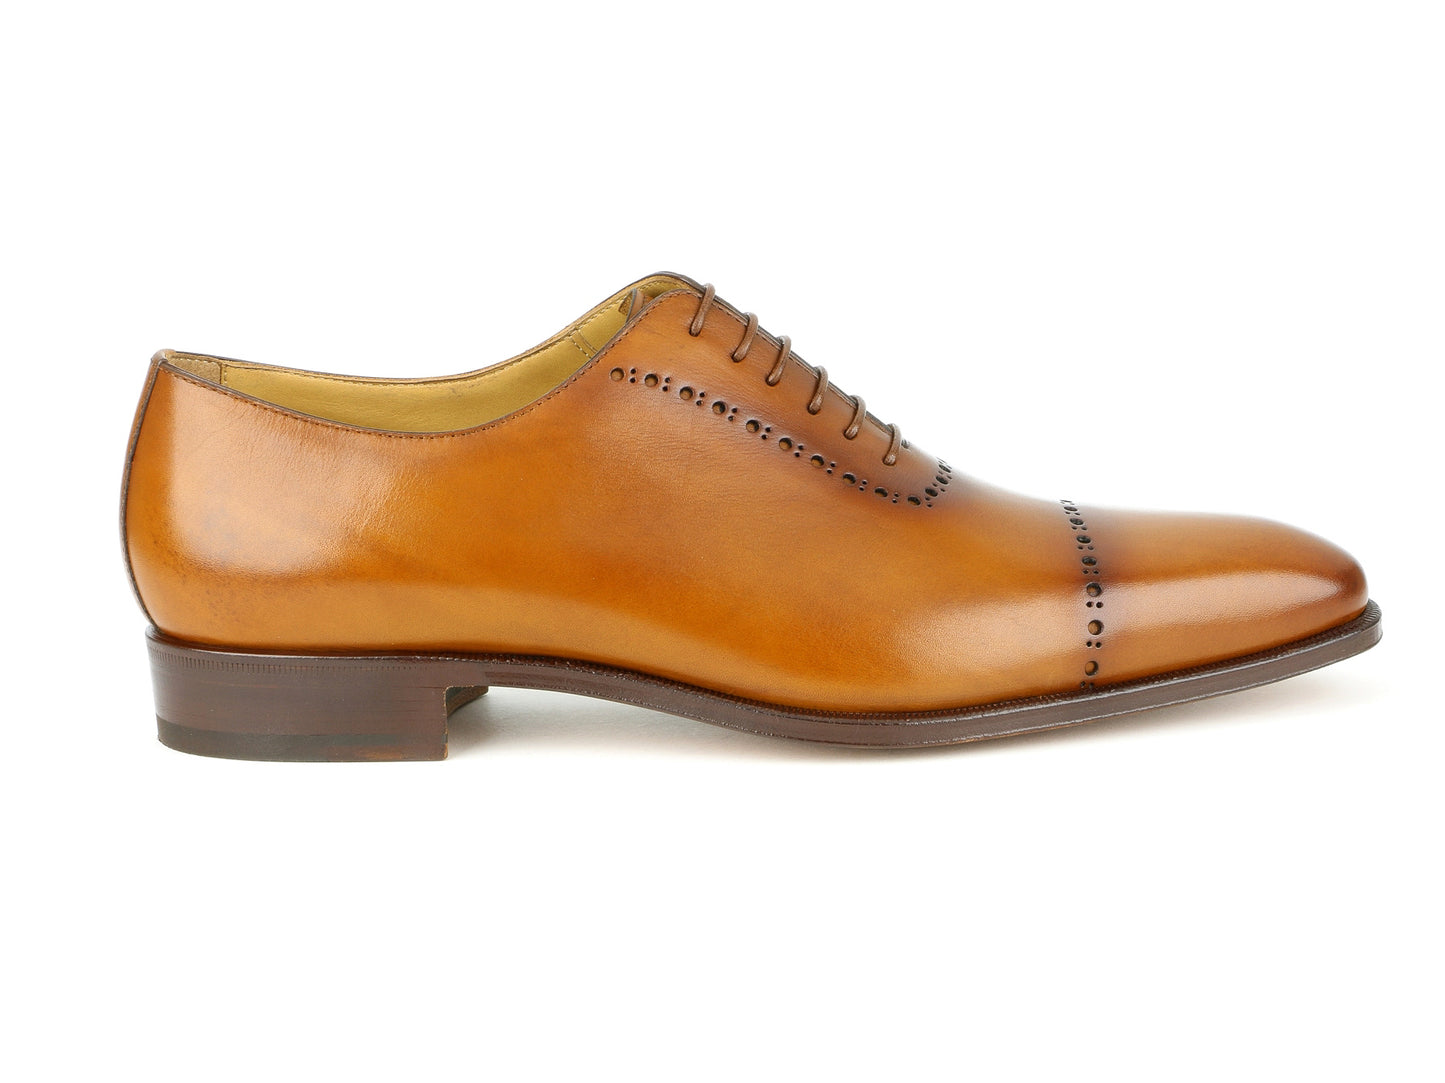 Leather Oxford punch holed